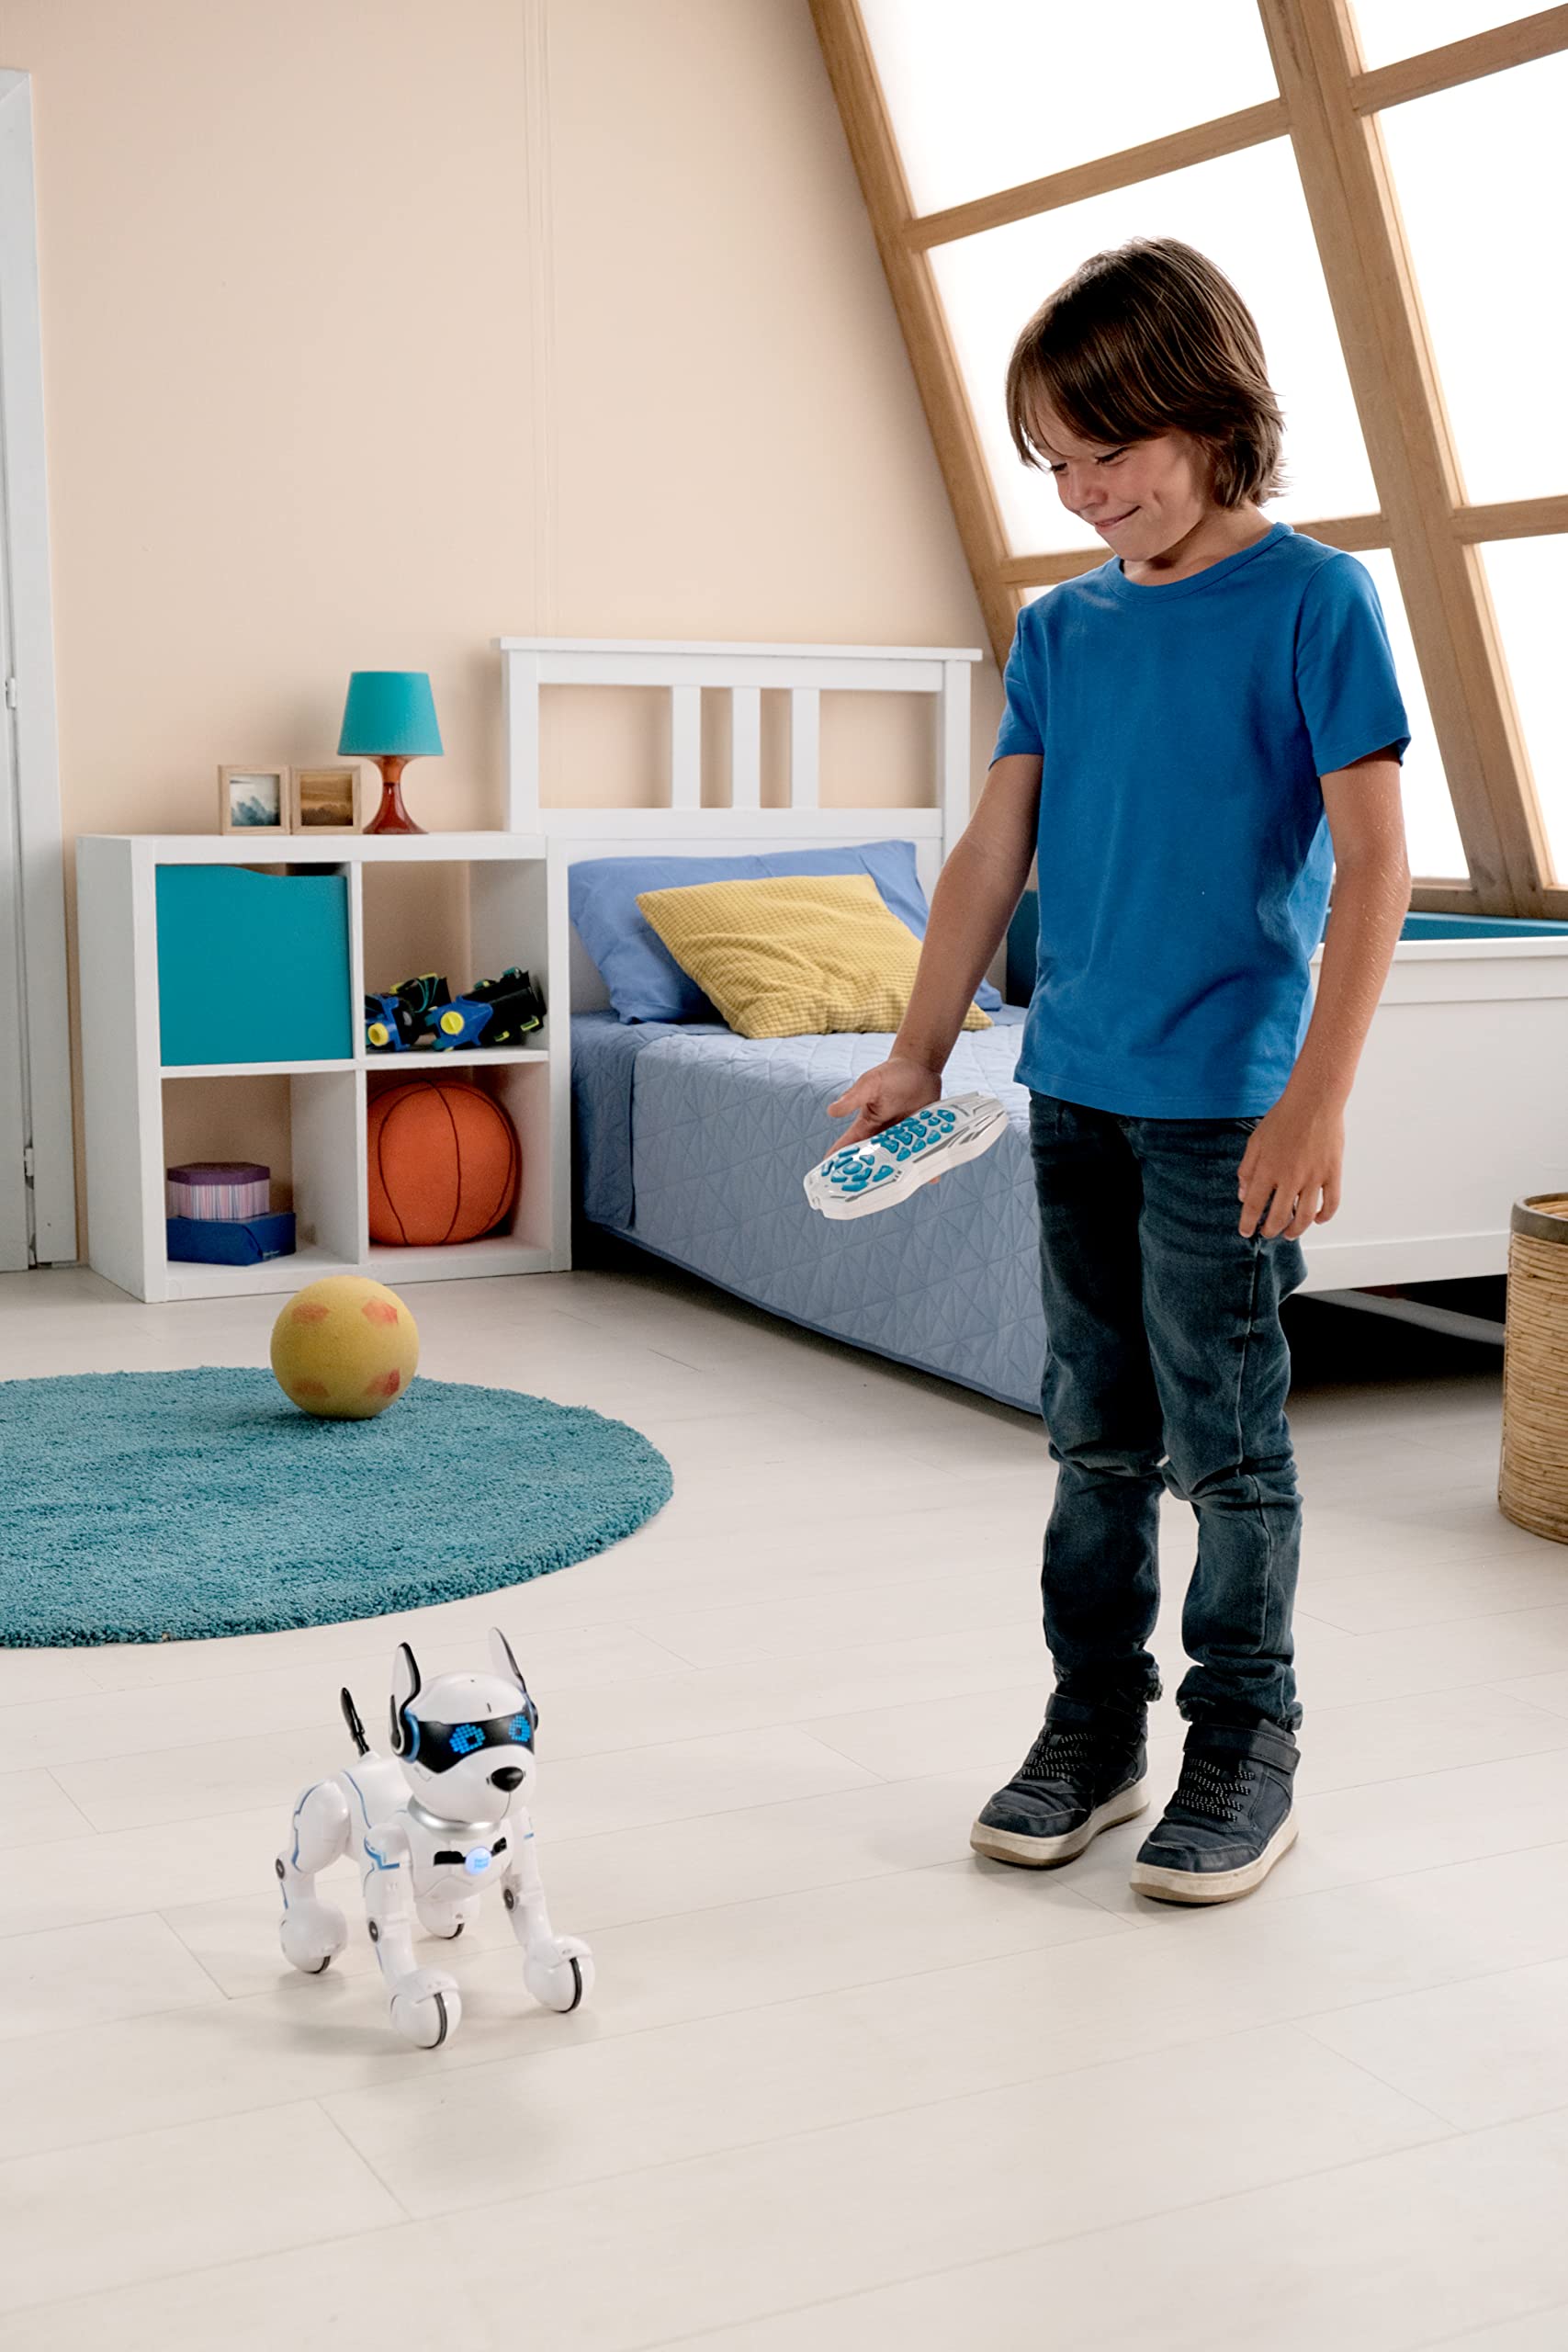 LEXiBOOK Power Puppy - My Smart Dog Robot to Train - Programmable Robot with Remote Control, Training and Gesture Control Function, Dance, Music, Light Effects, Toy for Children - DOG01